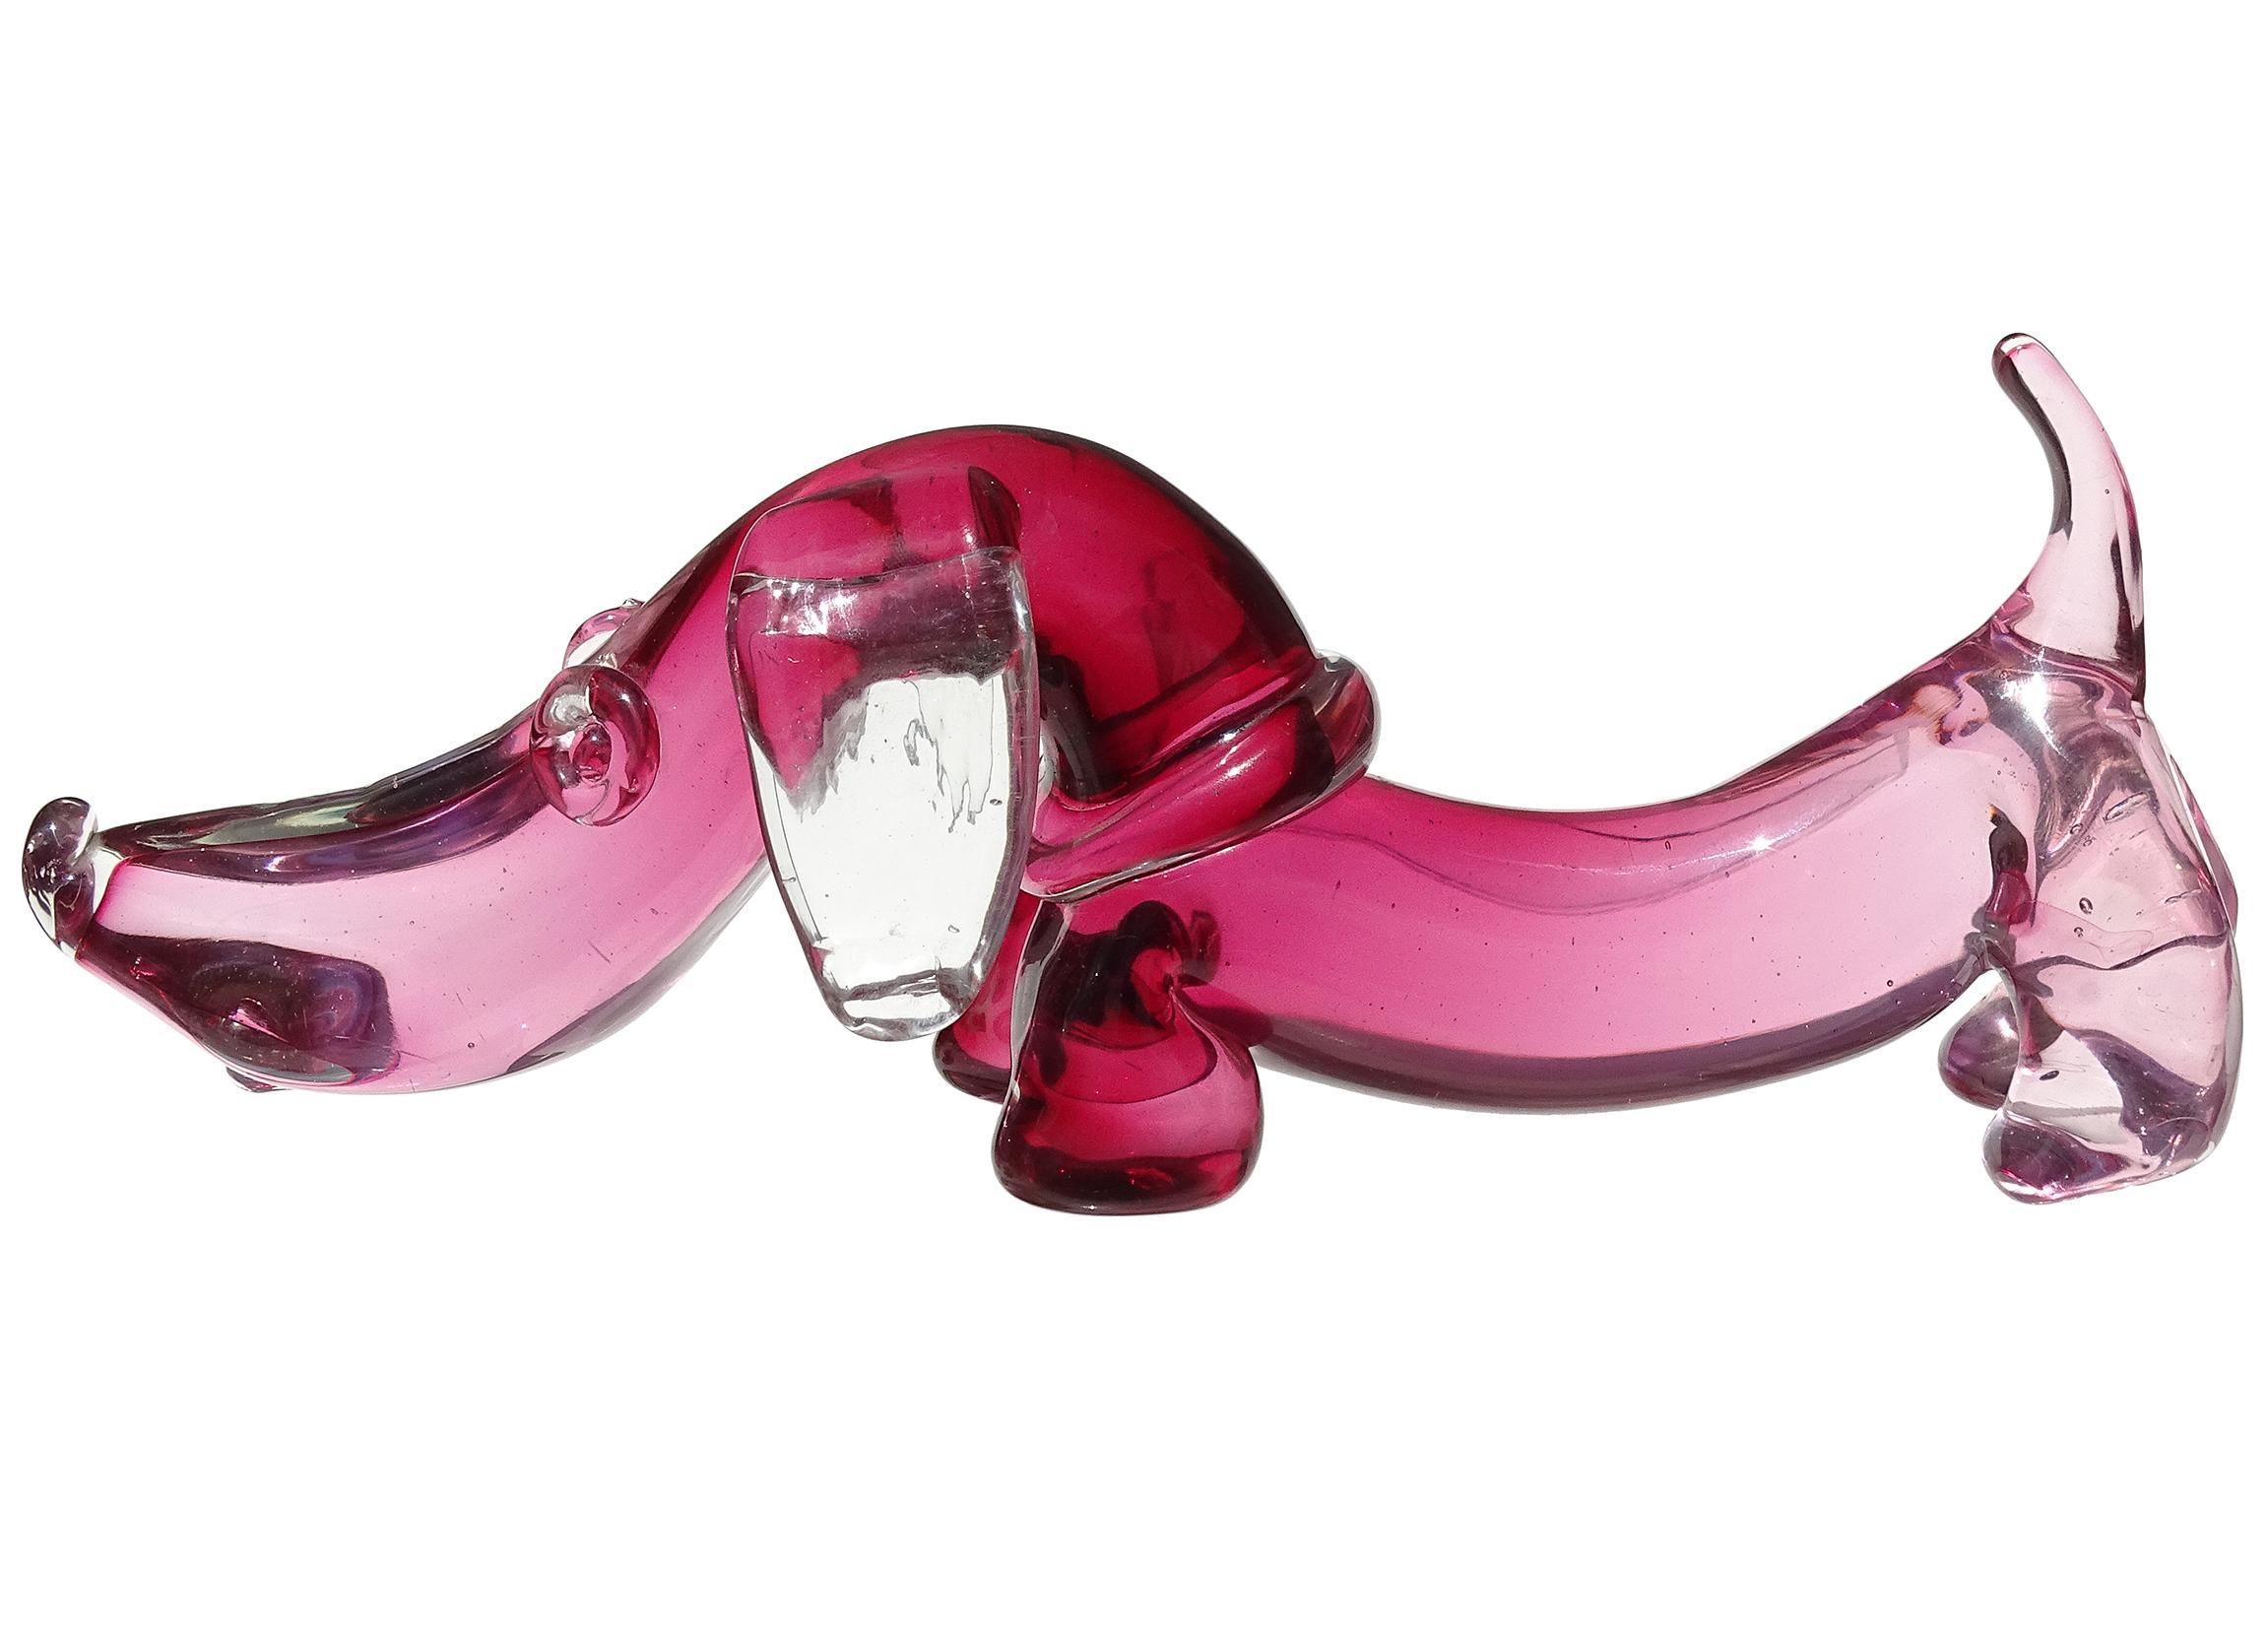 Beautiful and cute Murano hand blown Sommerso dark pink and clear Italian art glass Dachshund puppy dog sculpture. Documented to designer Archimede Seguso. The puppy has an applied collar, floppy ears, and tongue sticking out. Would make a great